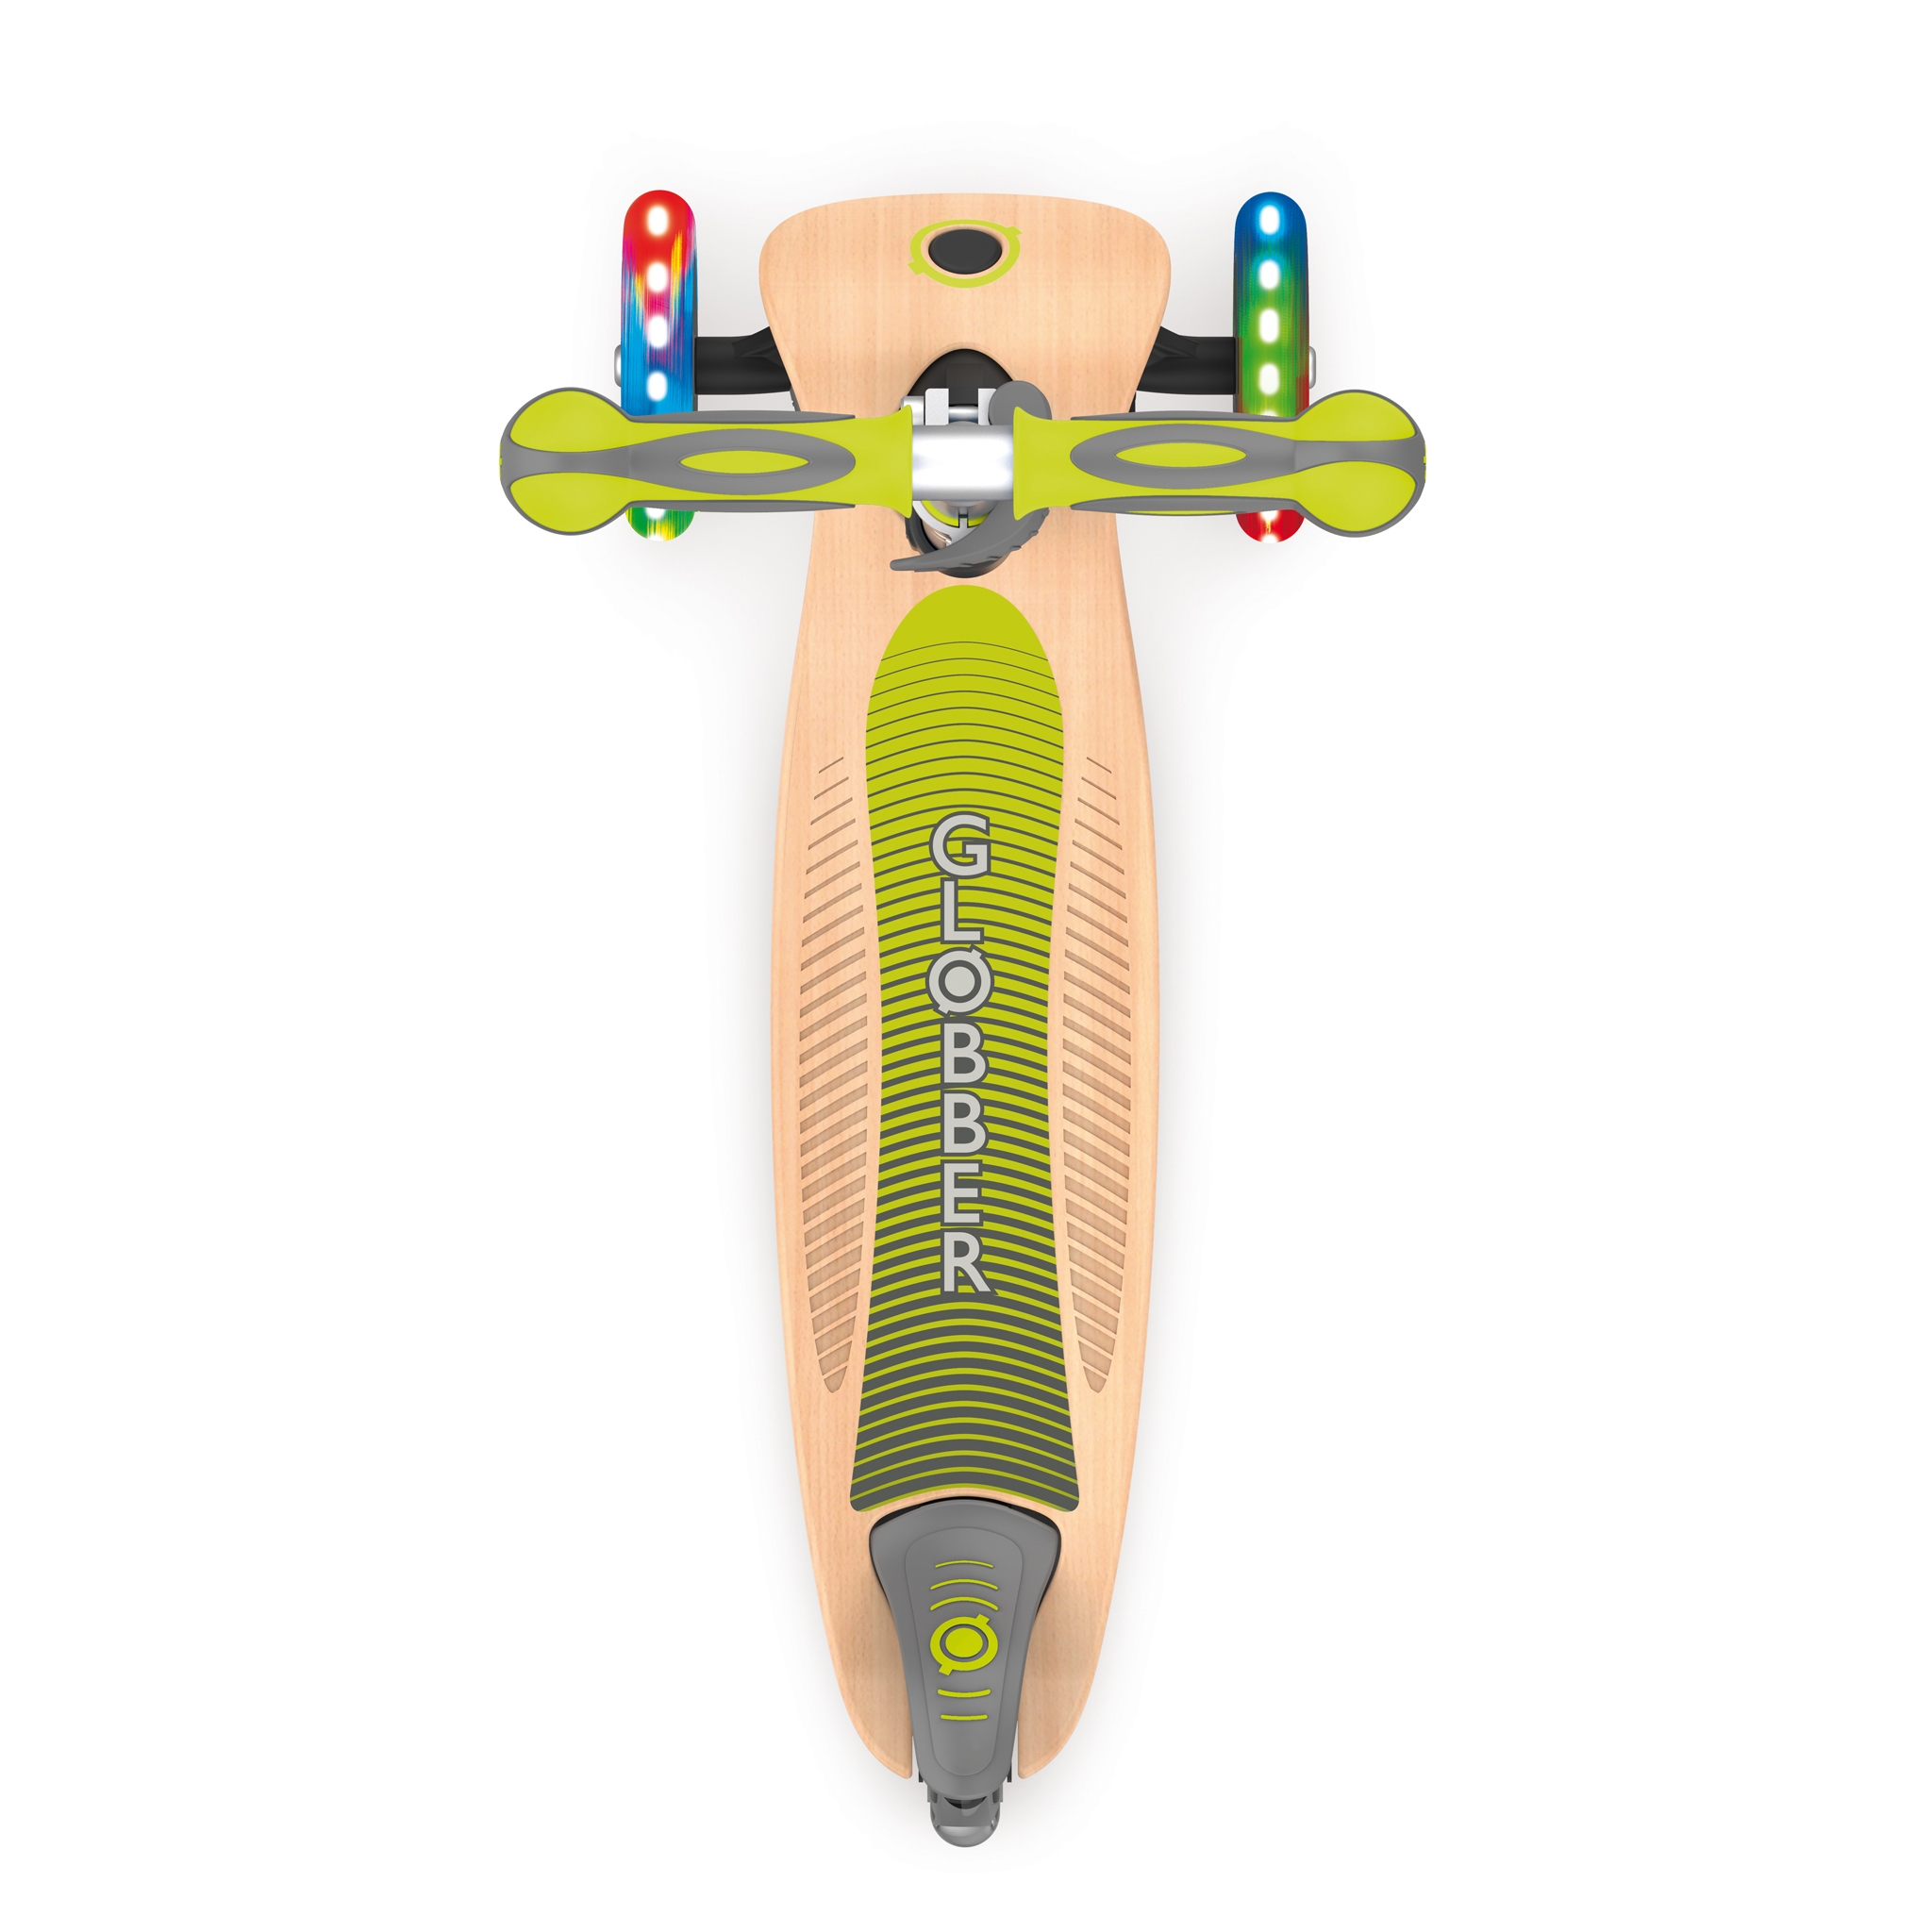 PRIMO-FOLDABLE-WOOD-LIGHTS-3-wheel-with-7-ply-wooden-scooter-deck-and-laser-engraved-sides-on-the-deck_lime-green 3